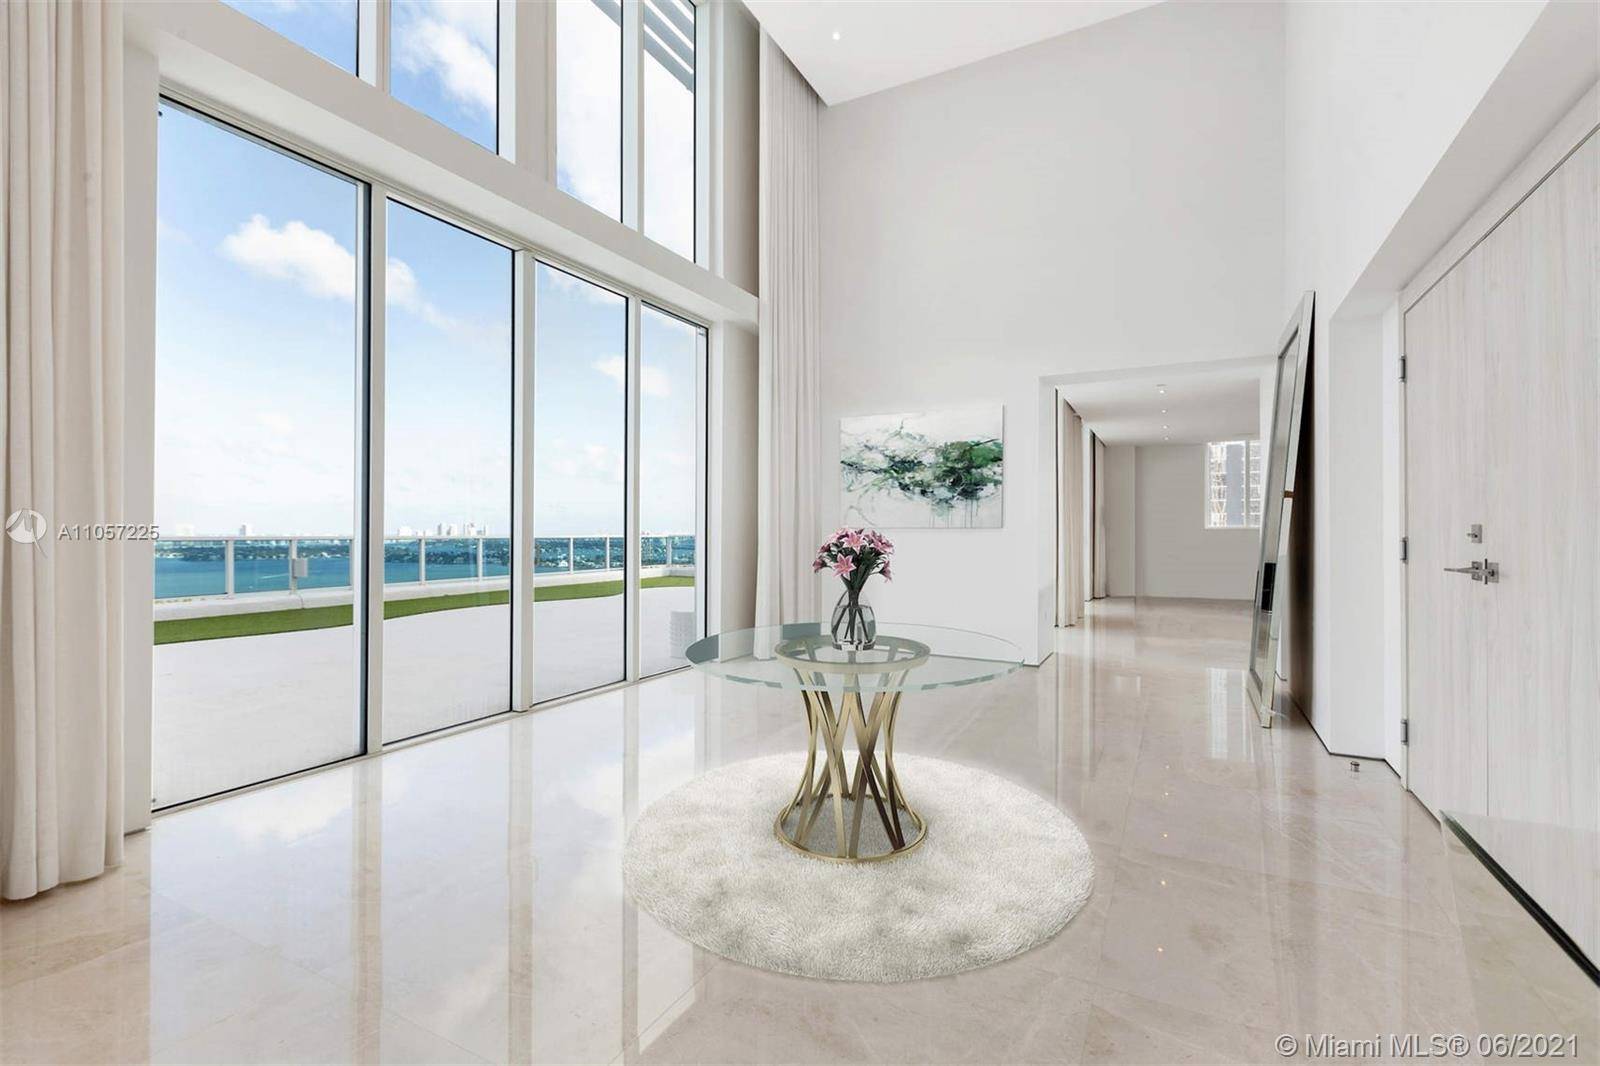 Step into a one of a kind Penthouse, A 2 STORY HOME ON A ROOFTOP, in Miami's Edgewater neighborhood.